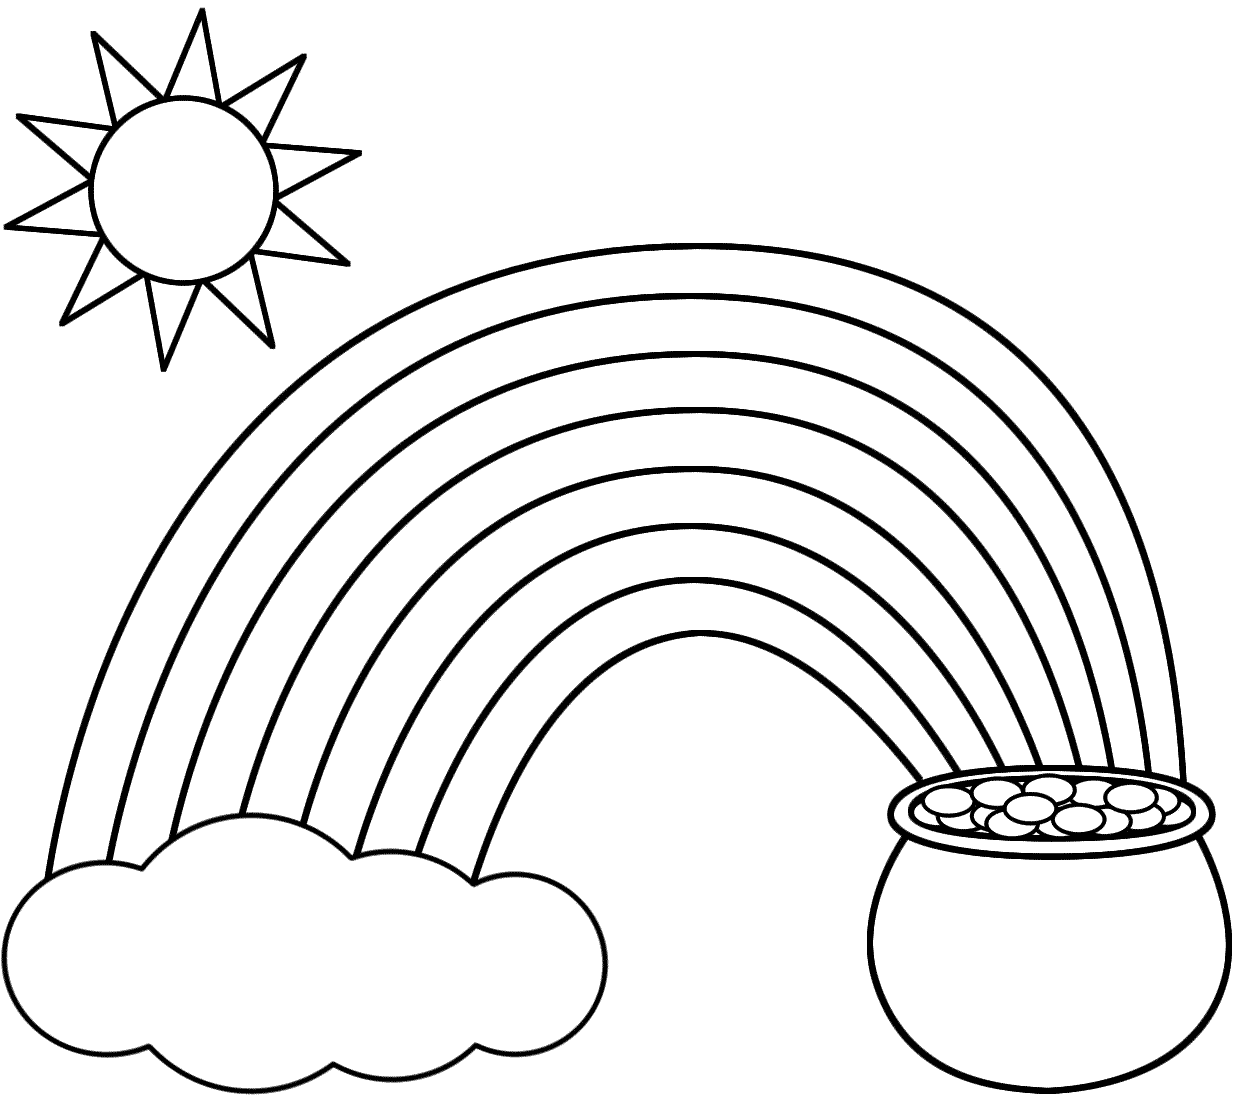 Coloring Pages Of Clouds